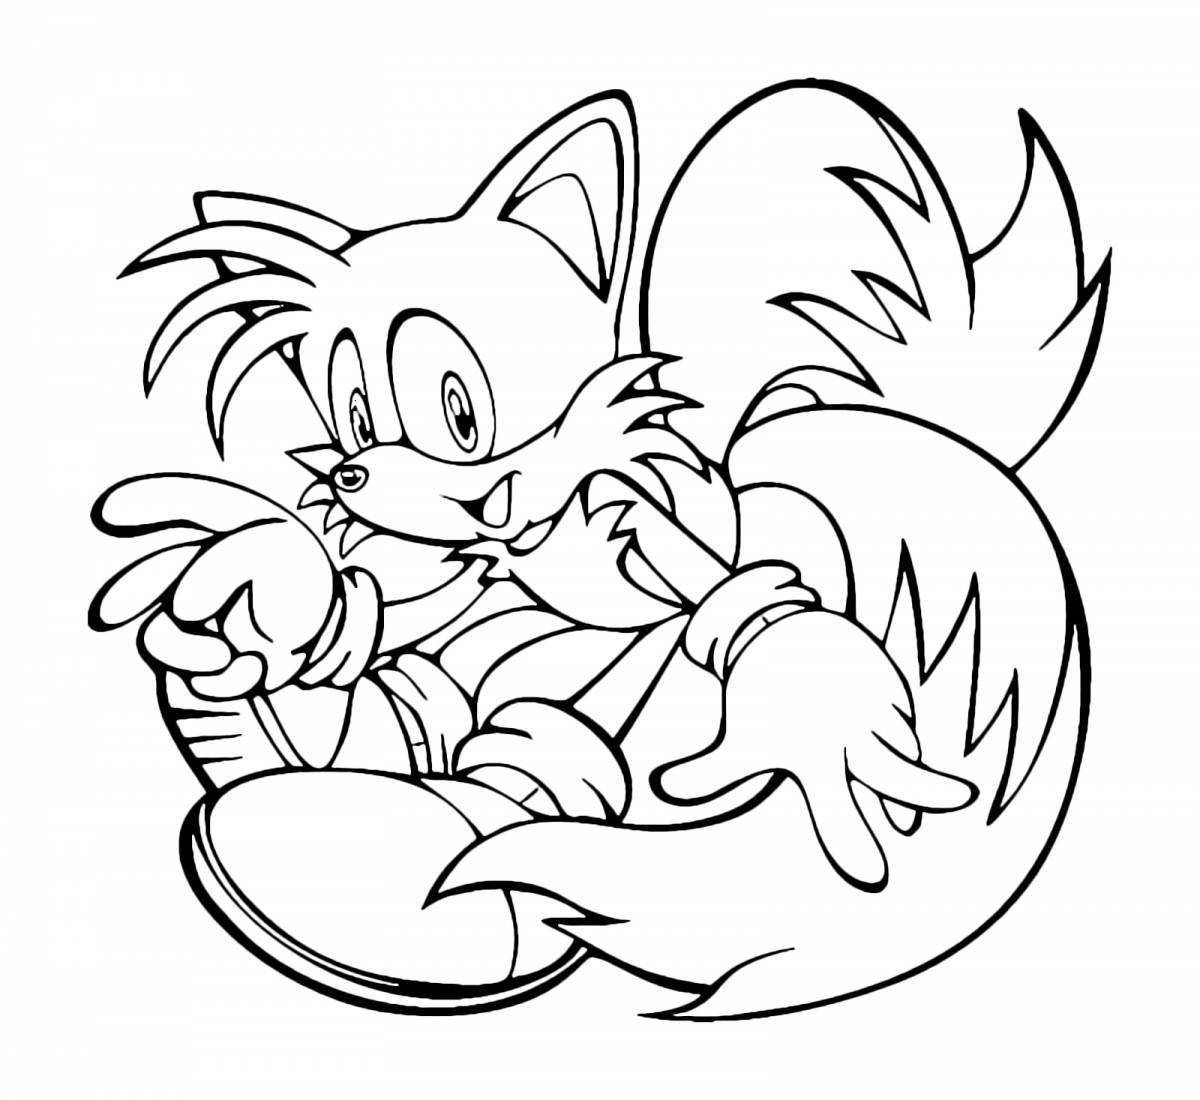 Great sonic and tails coloring page